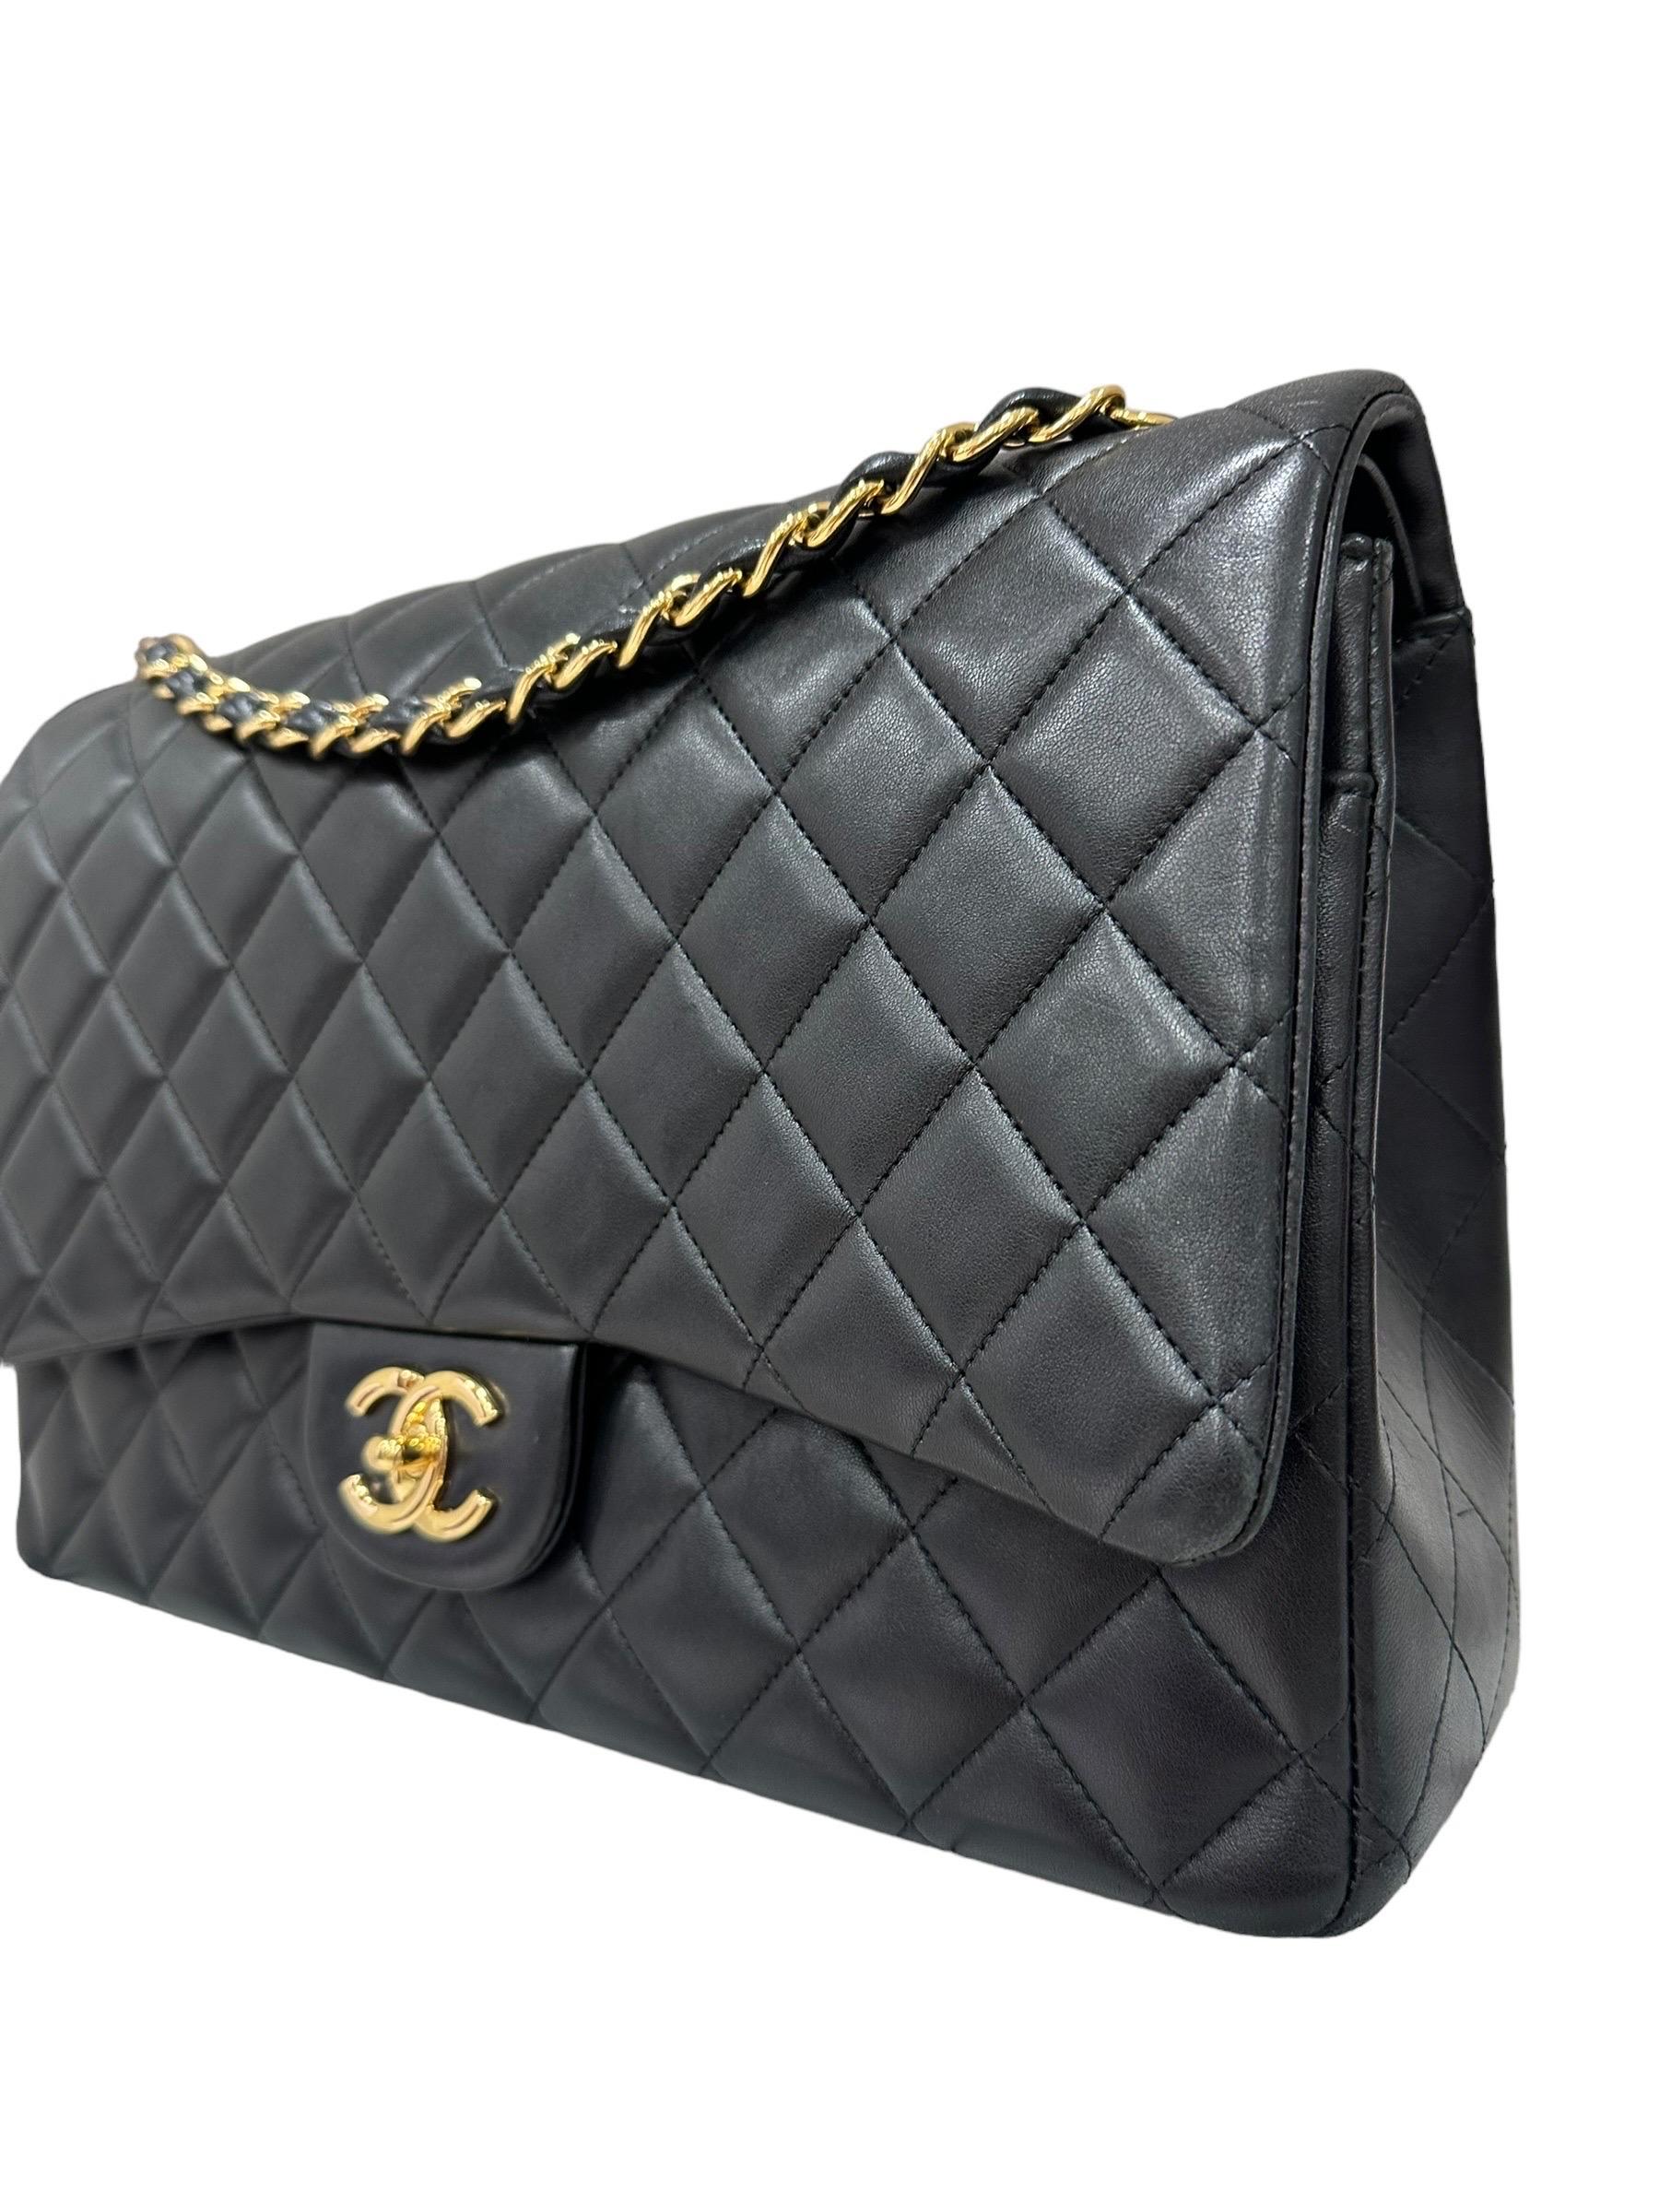 2019 Chanel Timeless Maxi Jumbo Pelle liscia Nera In Excellent Condition For Sale In Torre Del Greco, IT